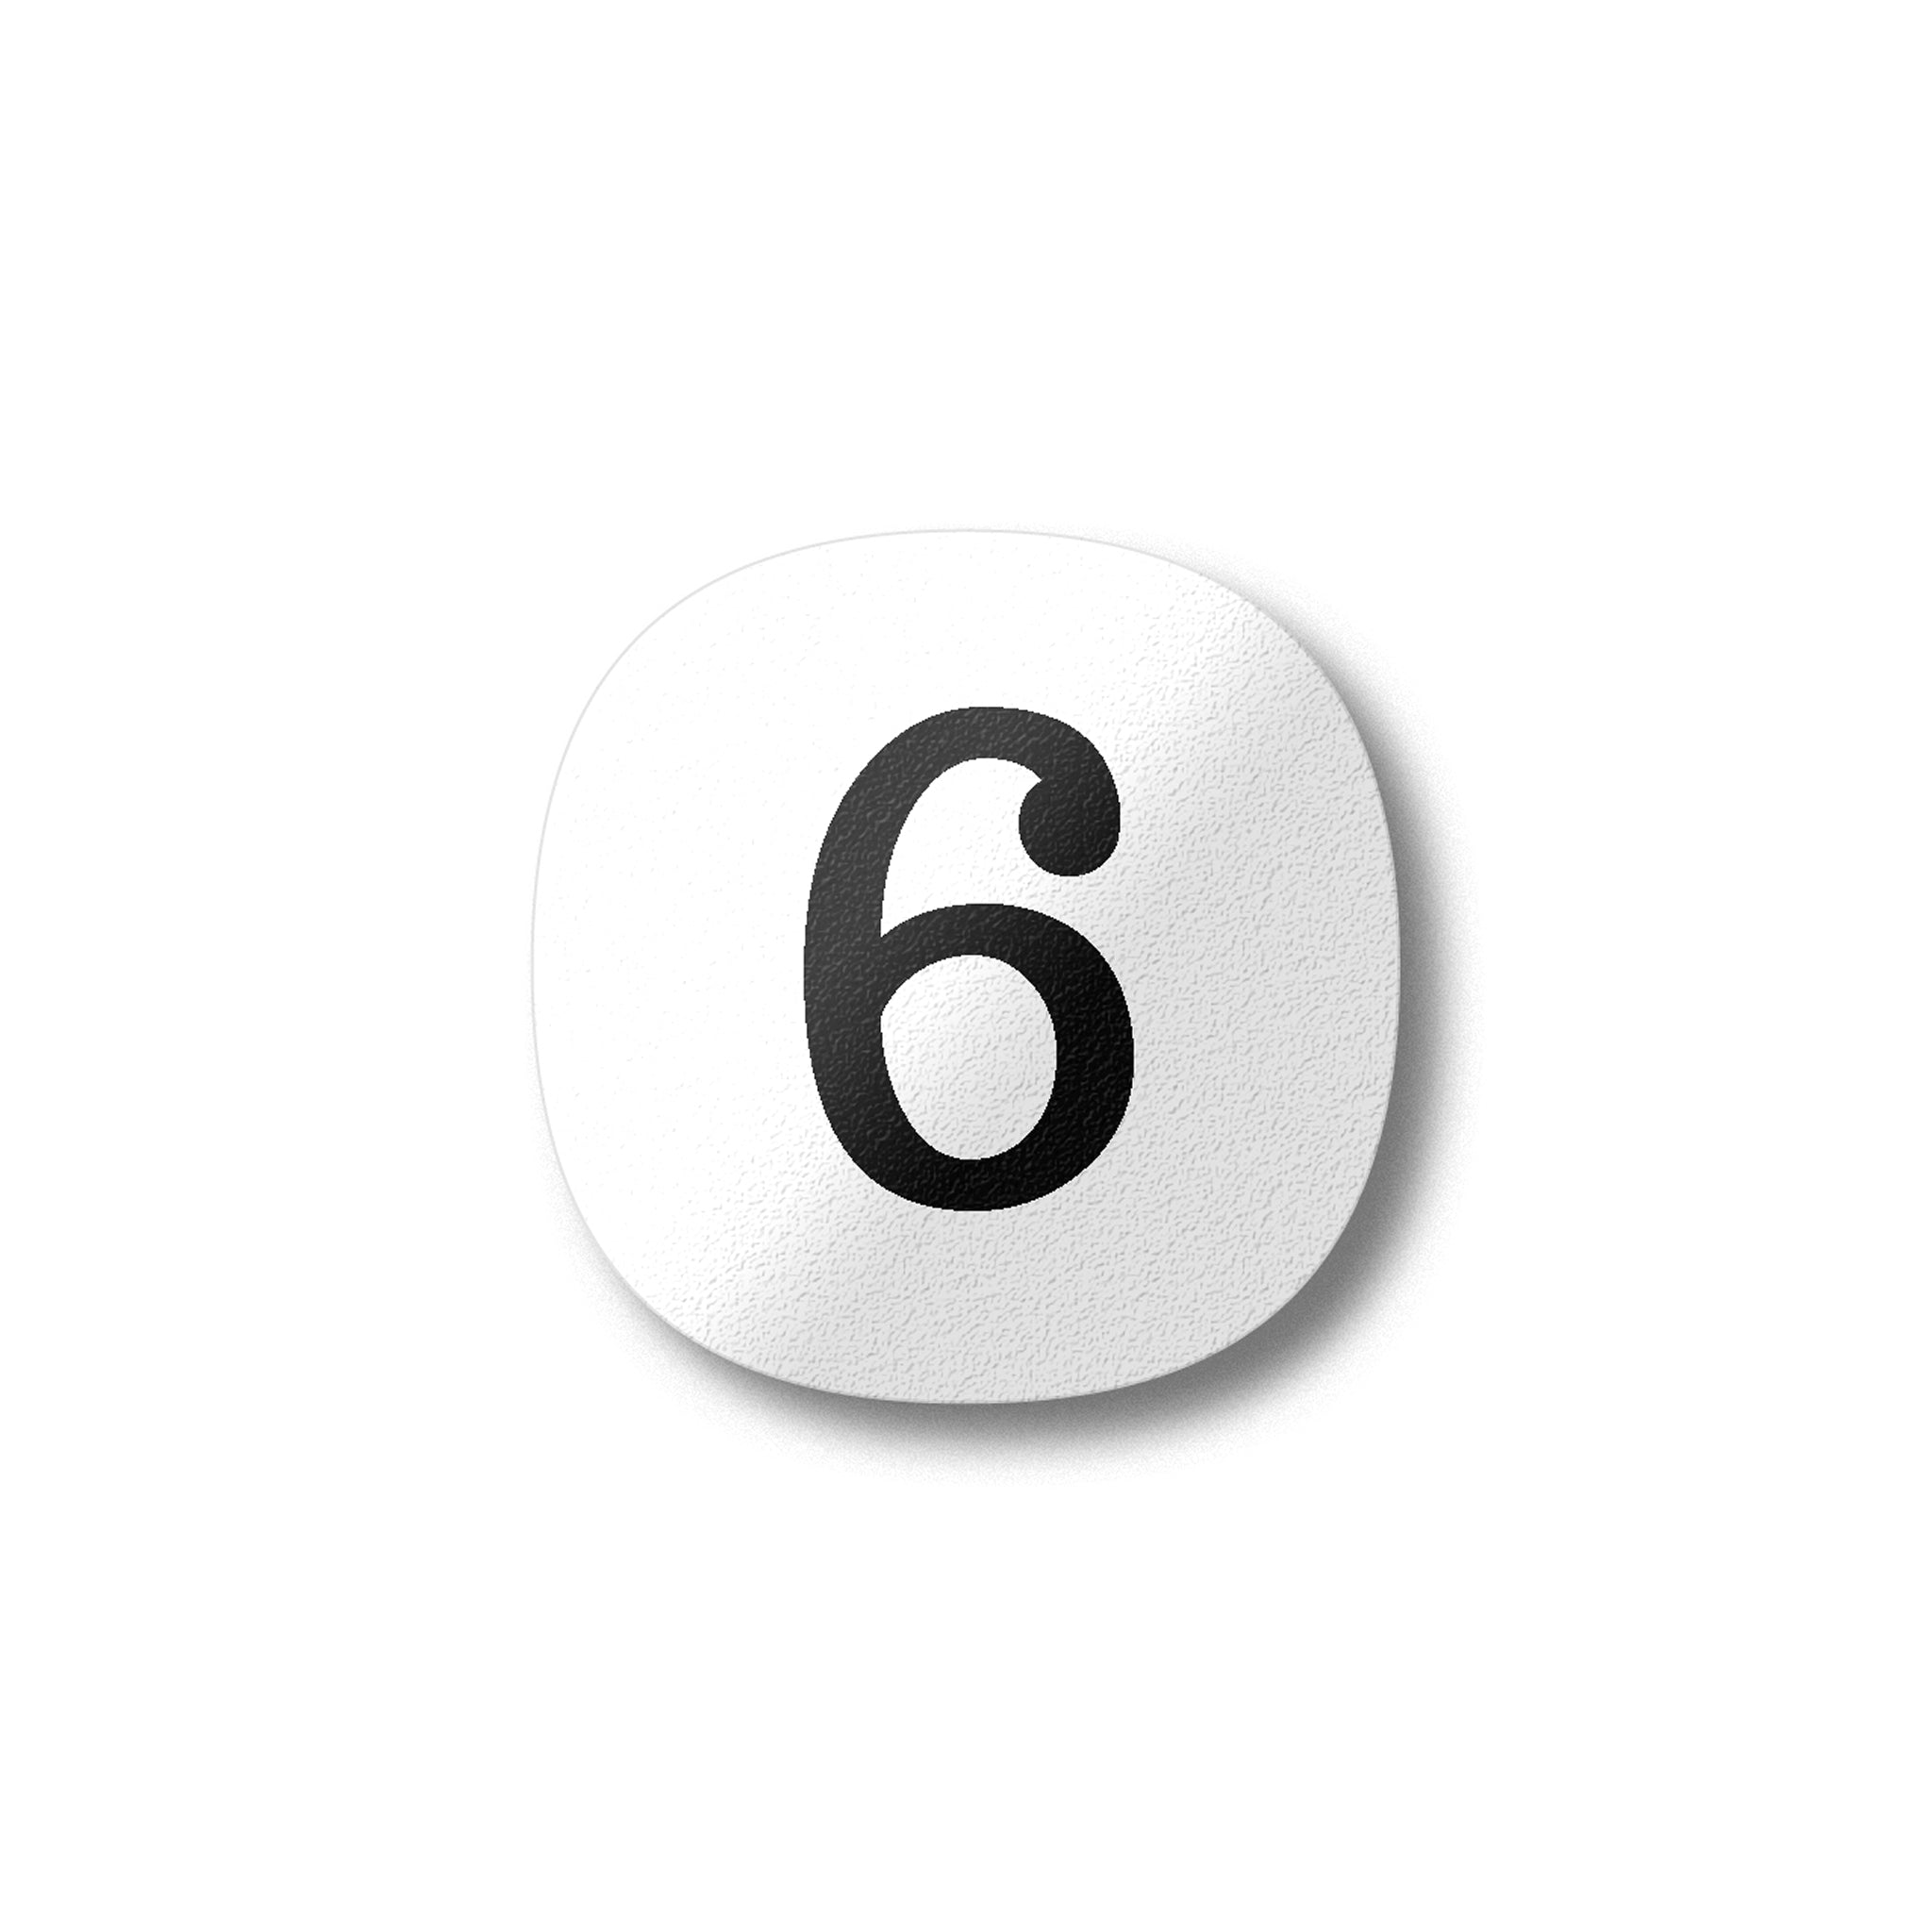 A black number six on a white background design plywood fridge magnet by Beyond the Fridge